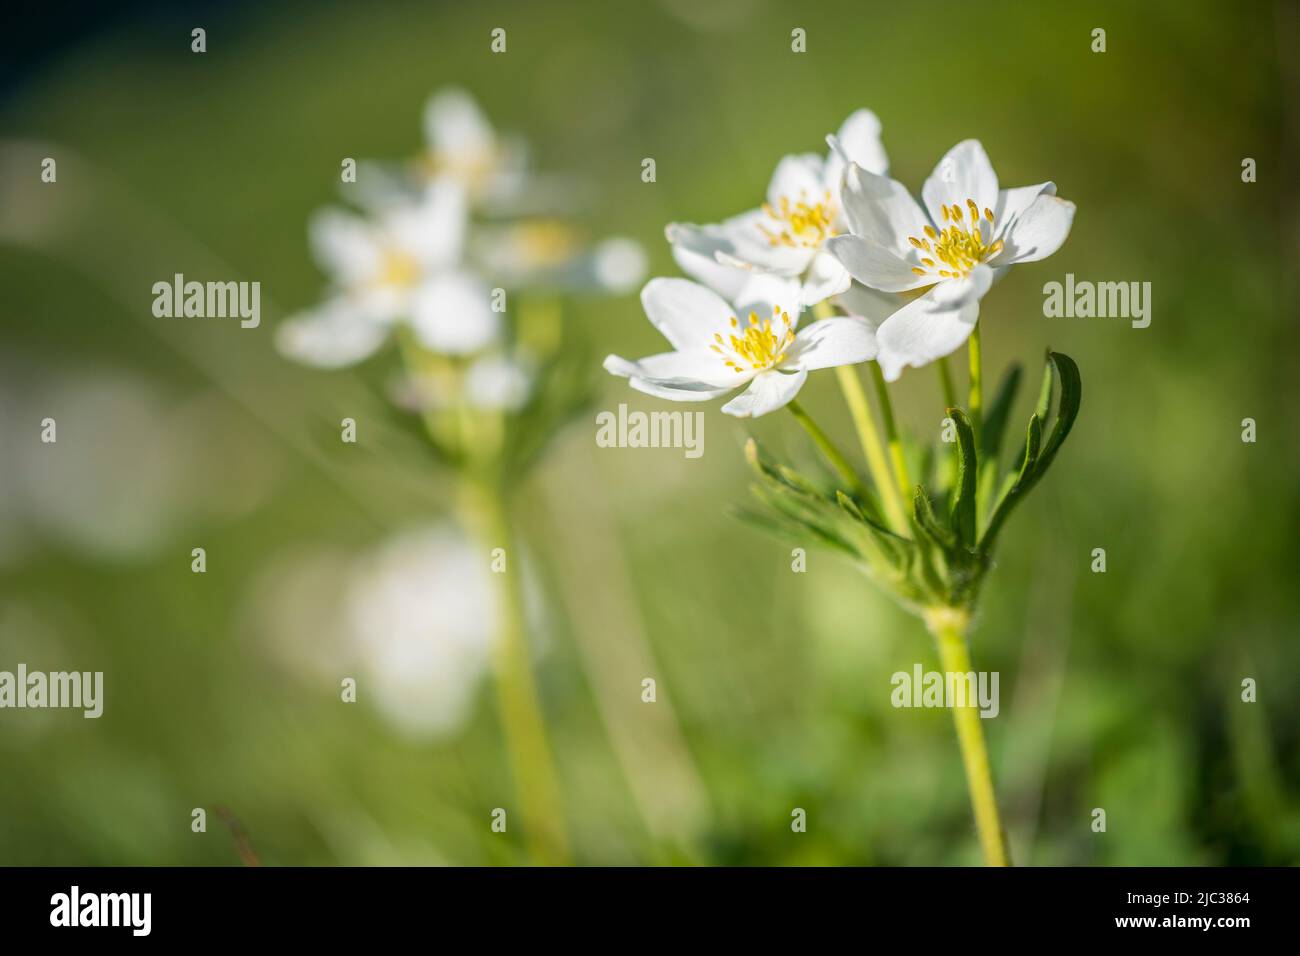 Anemonastrum narcissiflorum, the narcissus anemone or narcissus-flowered anemone, is a herbaceous perennial. Stock Photo